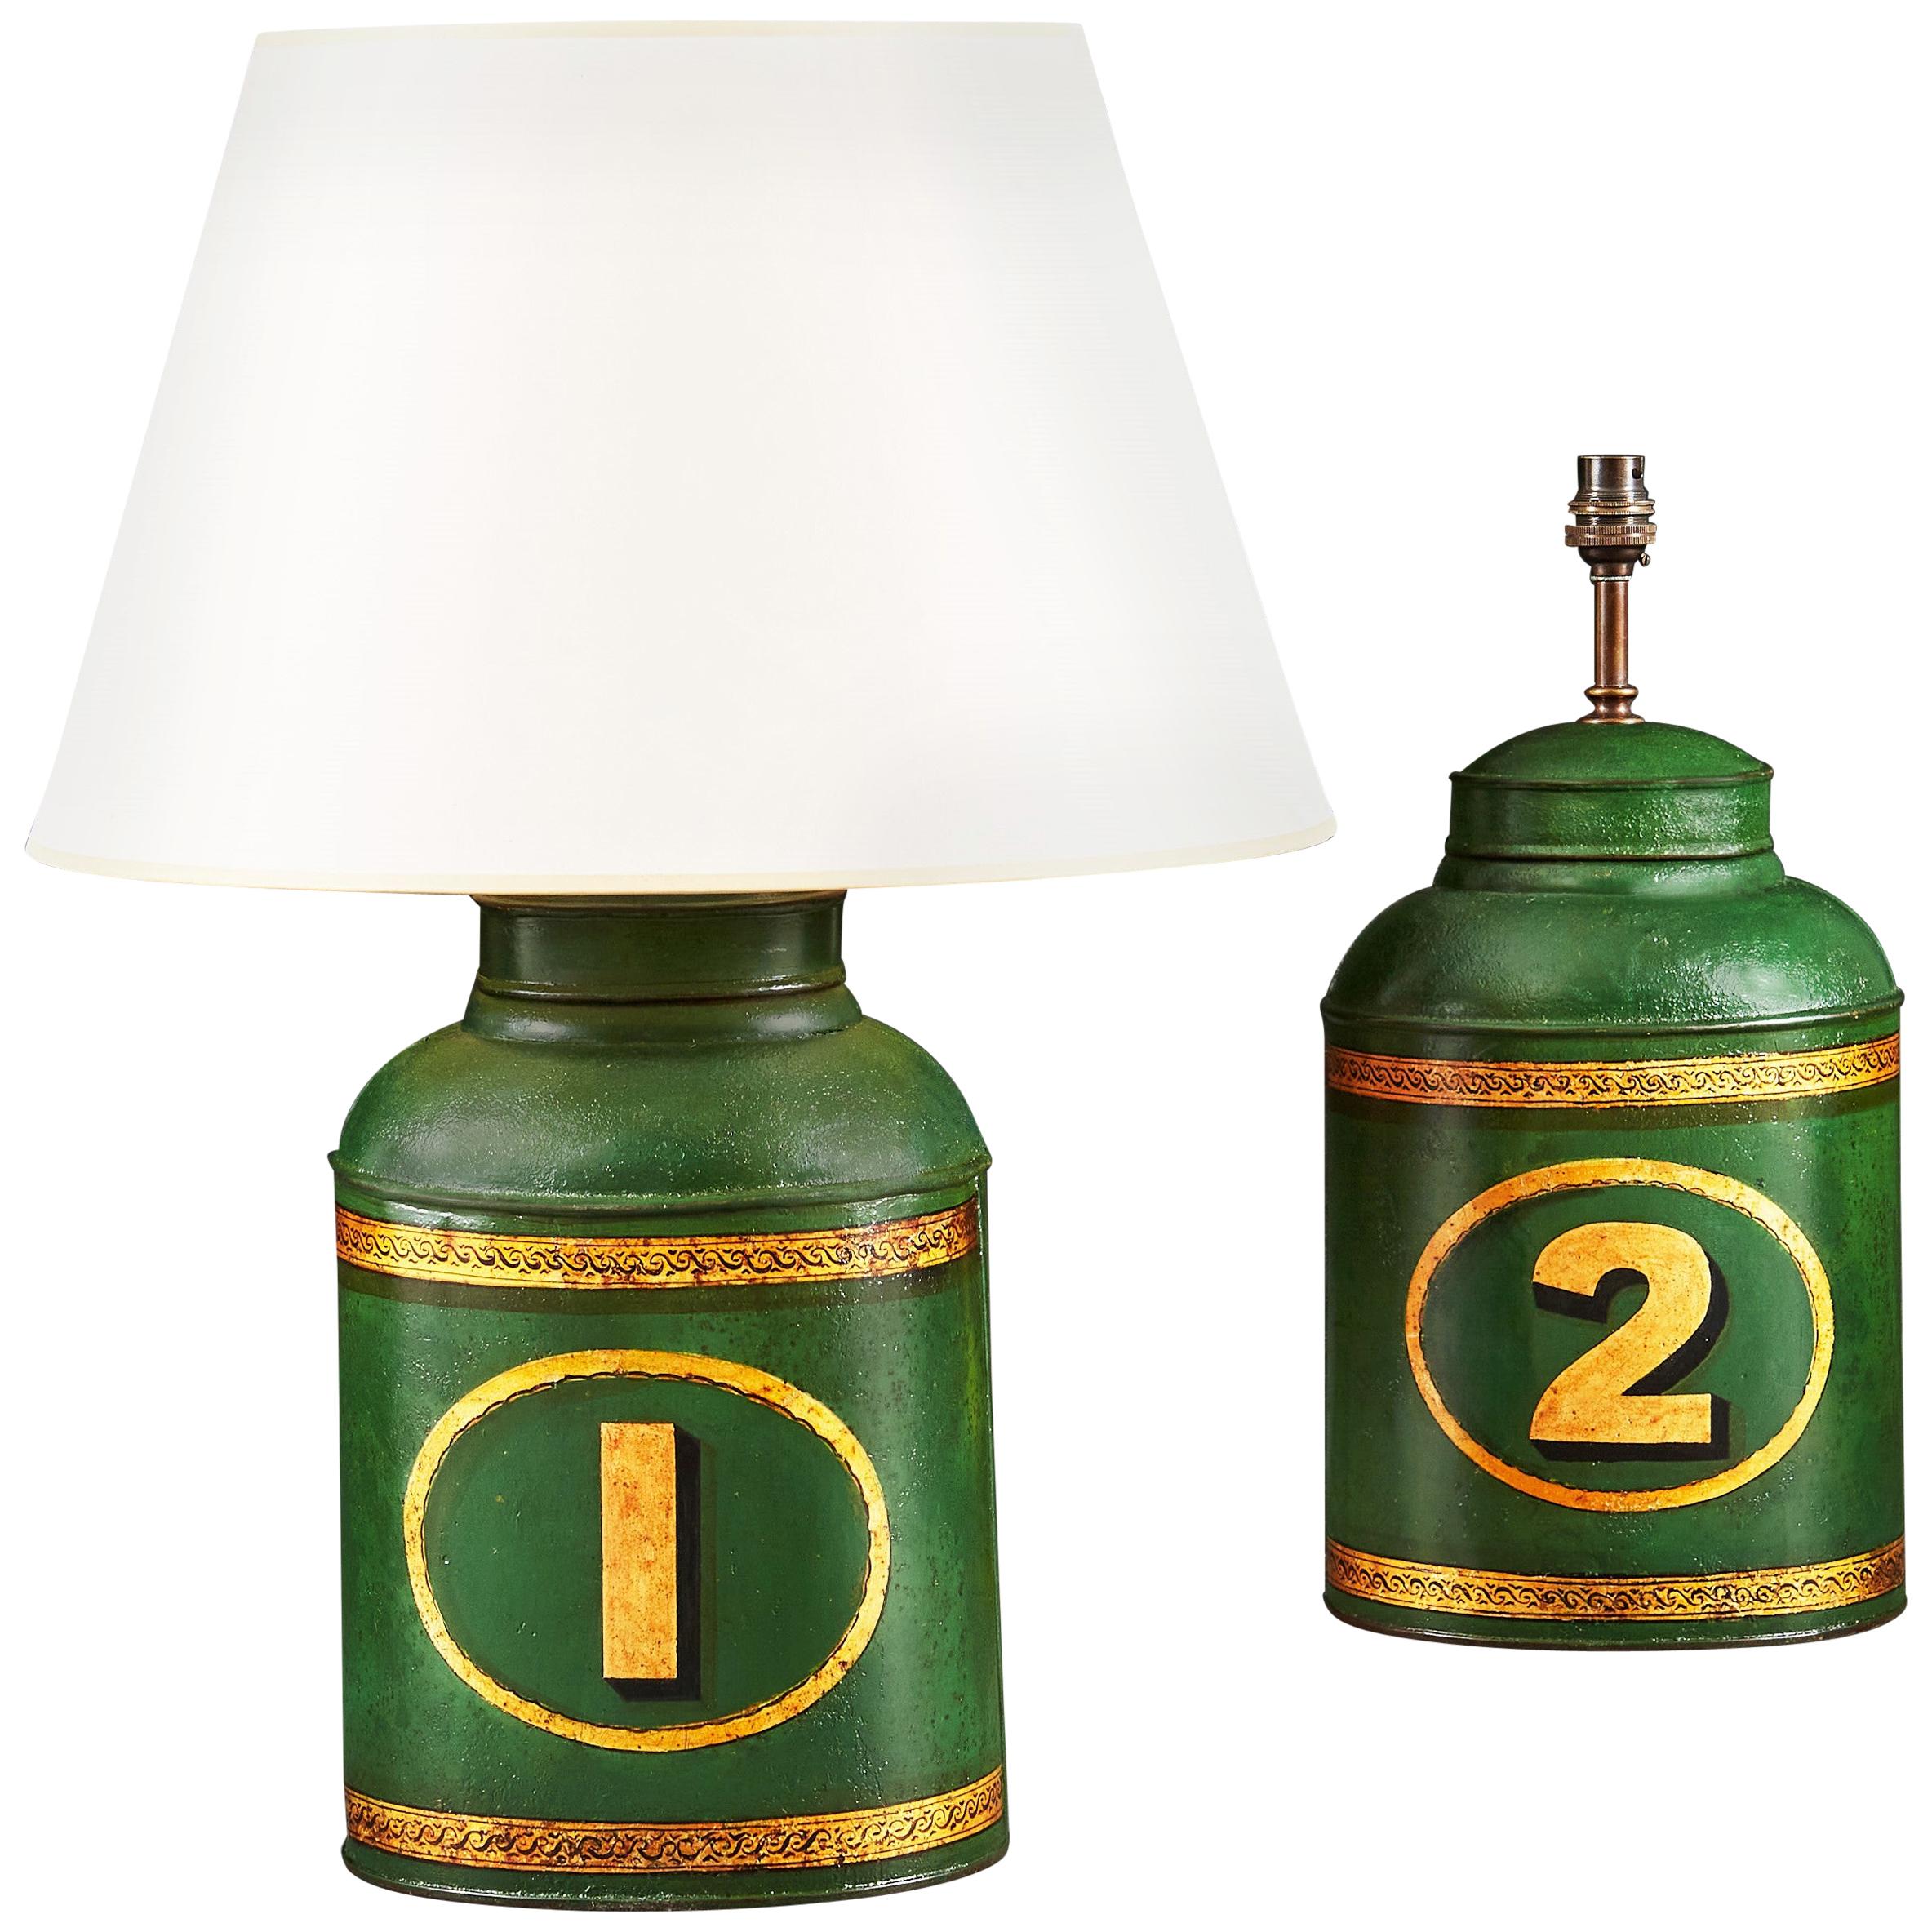 Pair of 19th Century Green Tole Tea Tins as Table Lamps